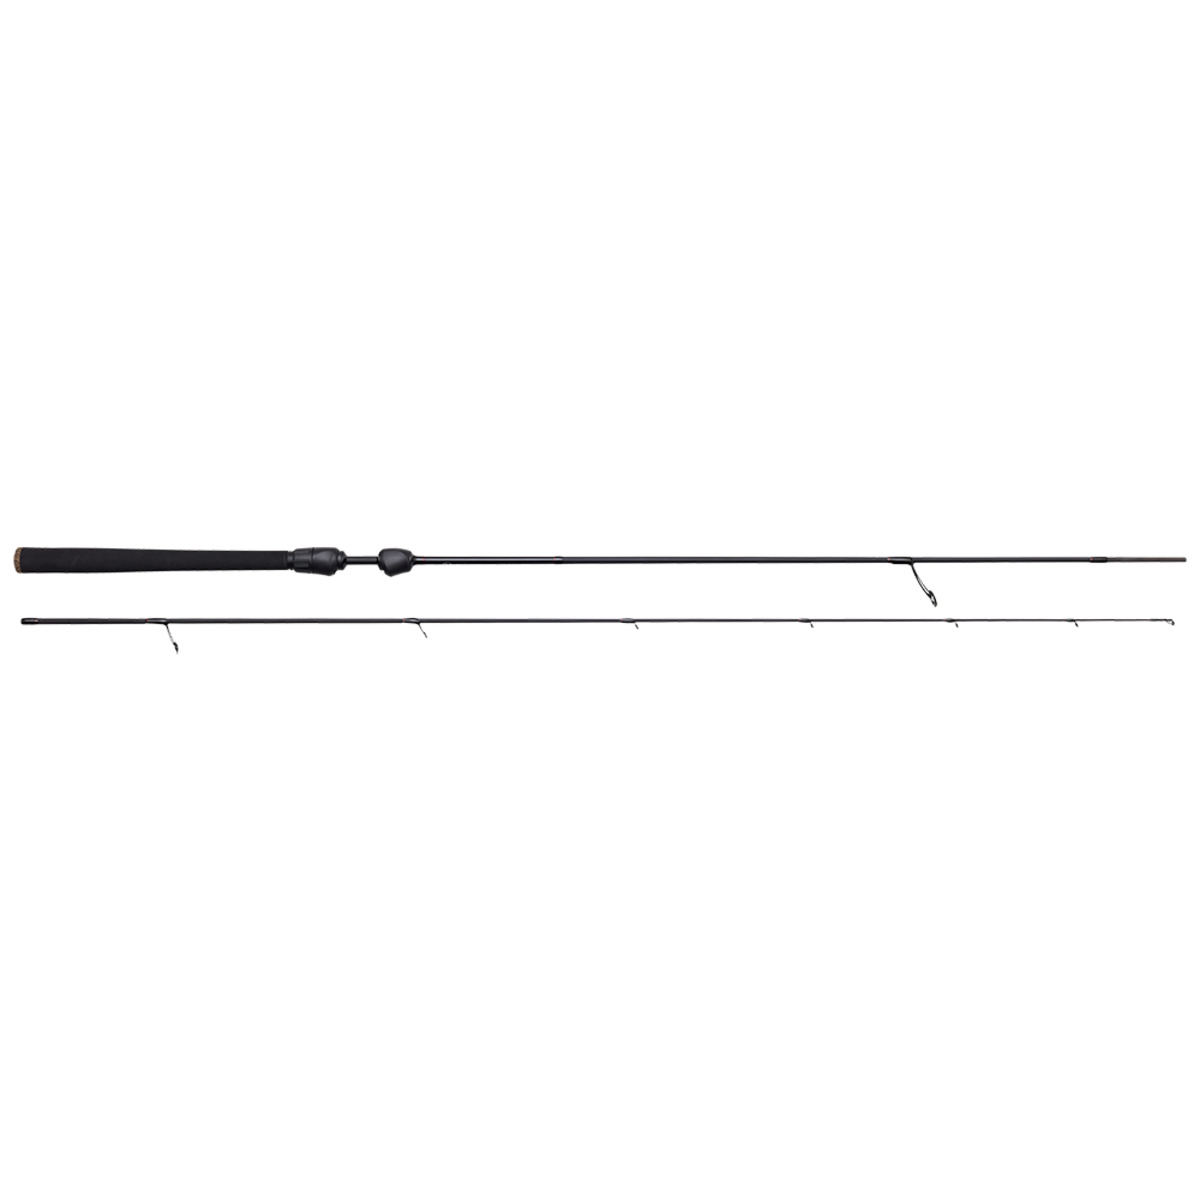 Ron Thompson Trout And Perch Stick - 6 ft 7in/206CM 4-16G 2SEC